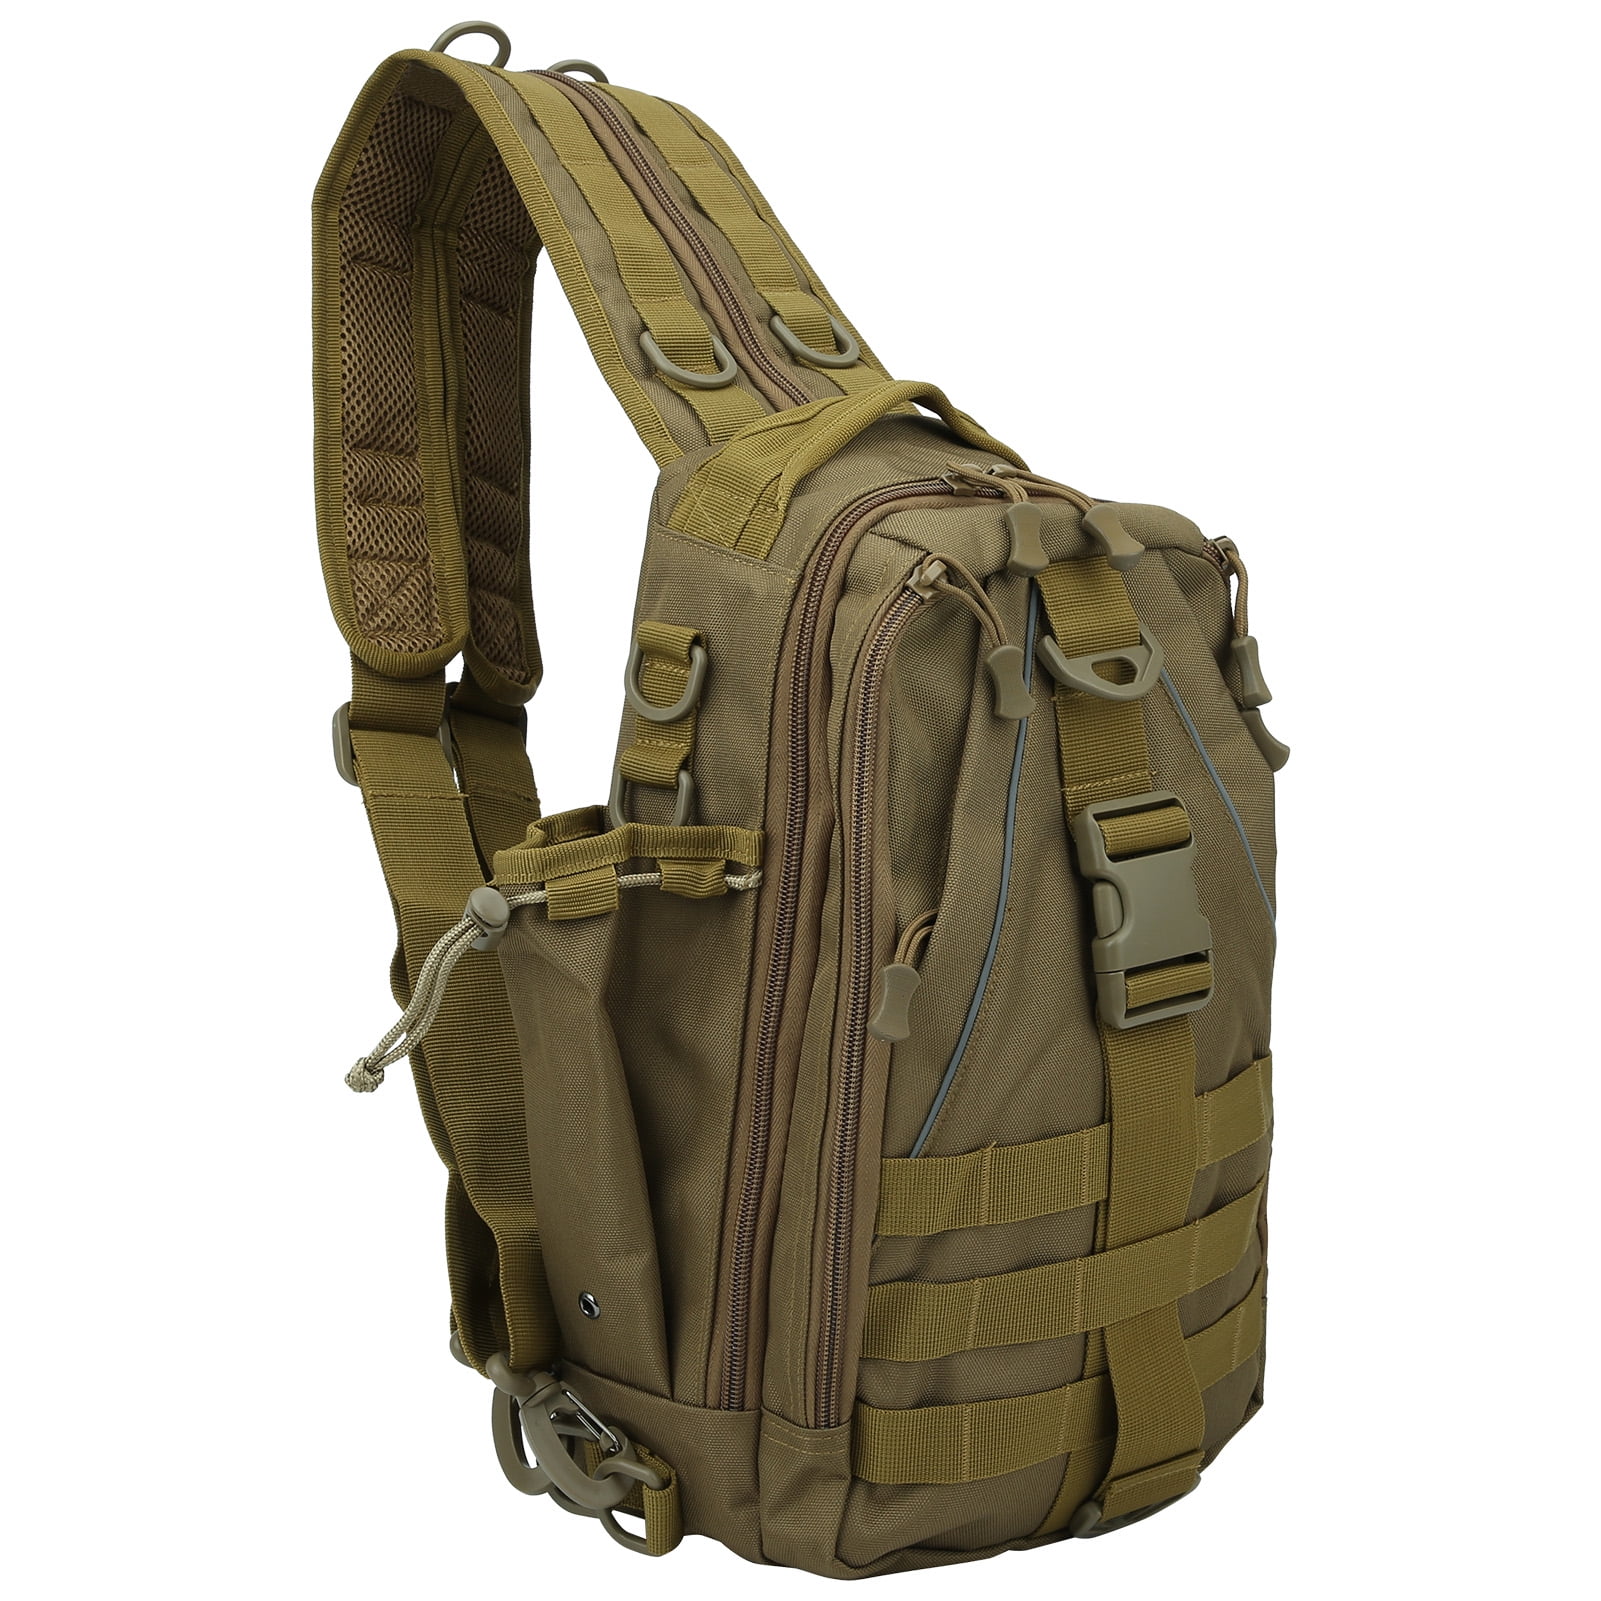 Wisport Whistler 35 II Army Backpack Military Hydration MOLLE Pack Coyote Brown 